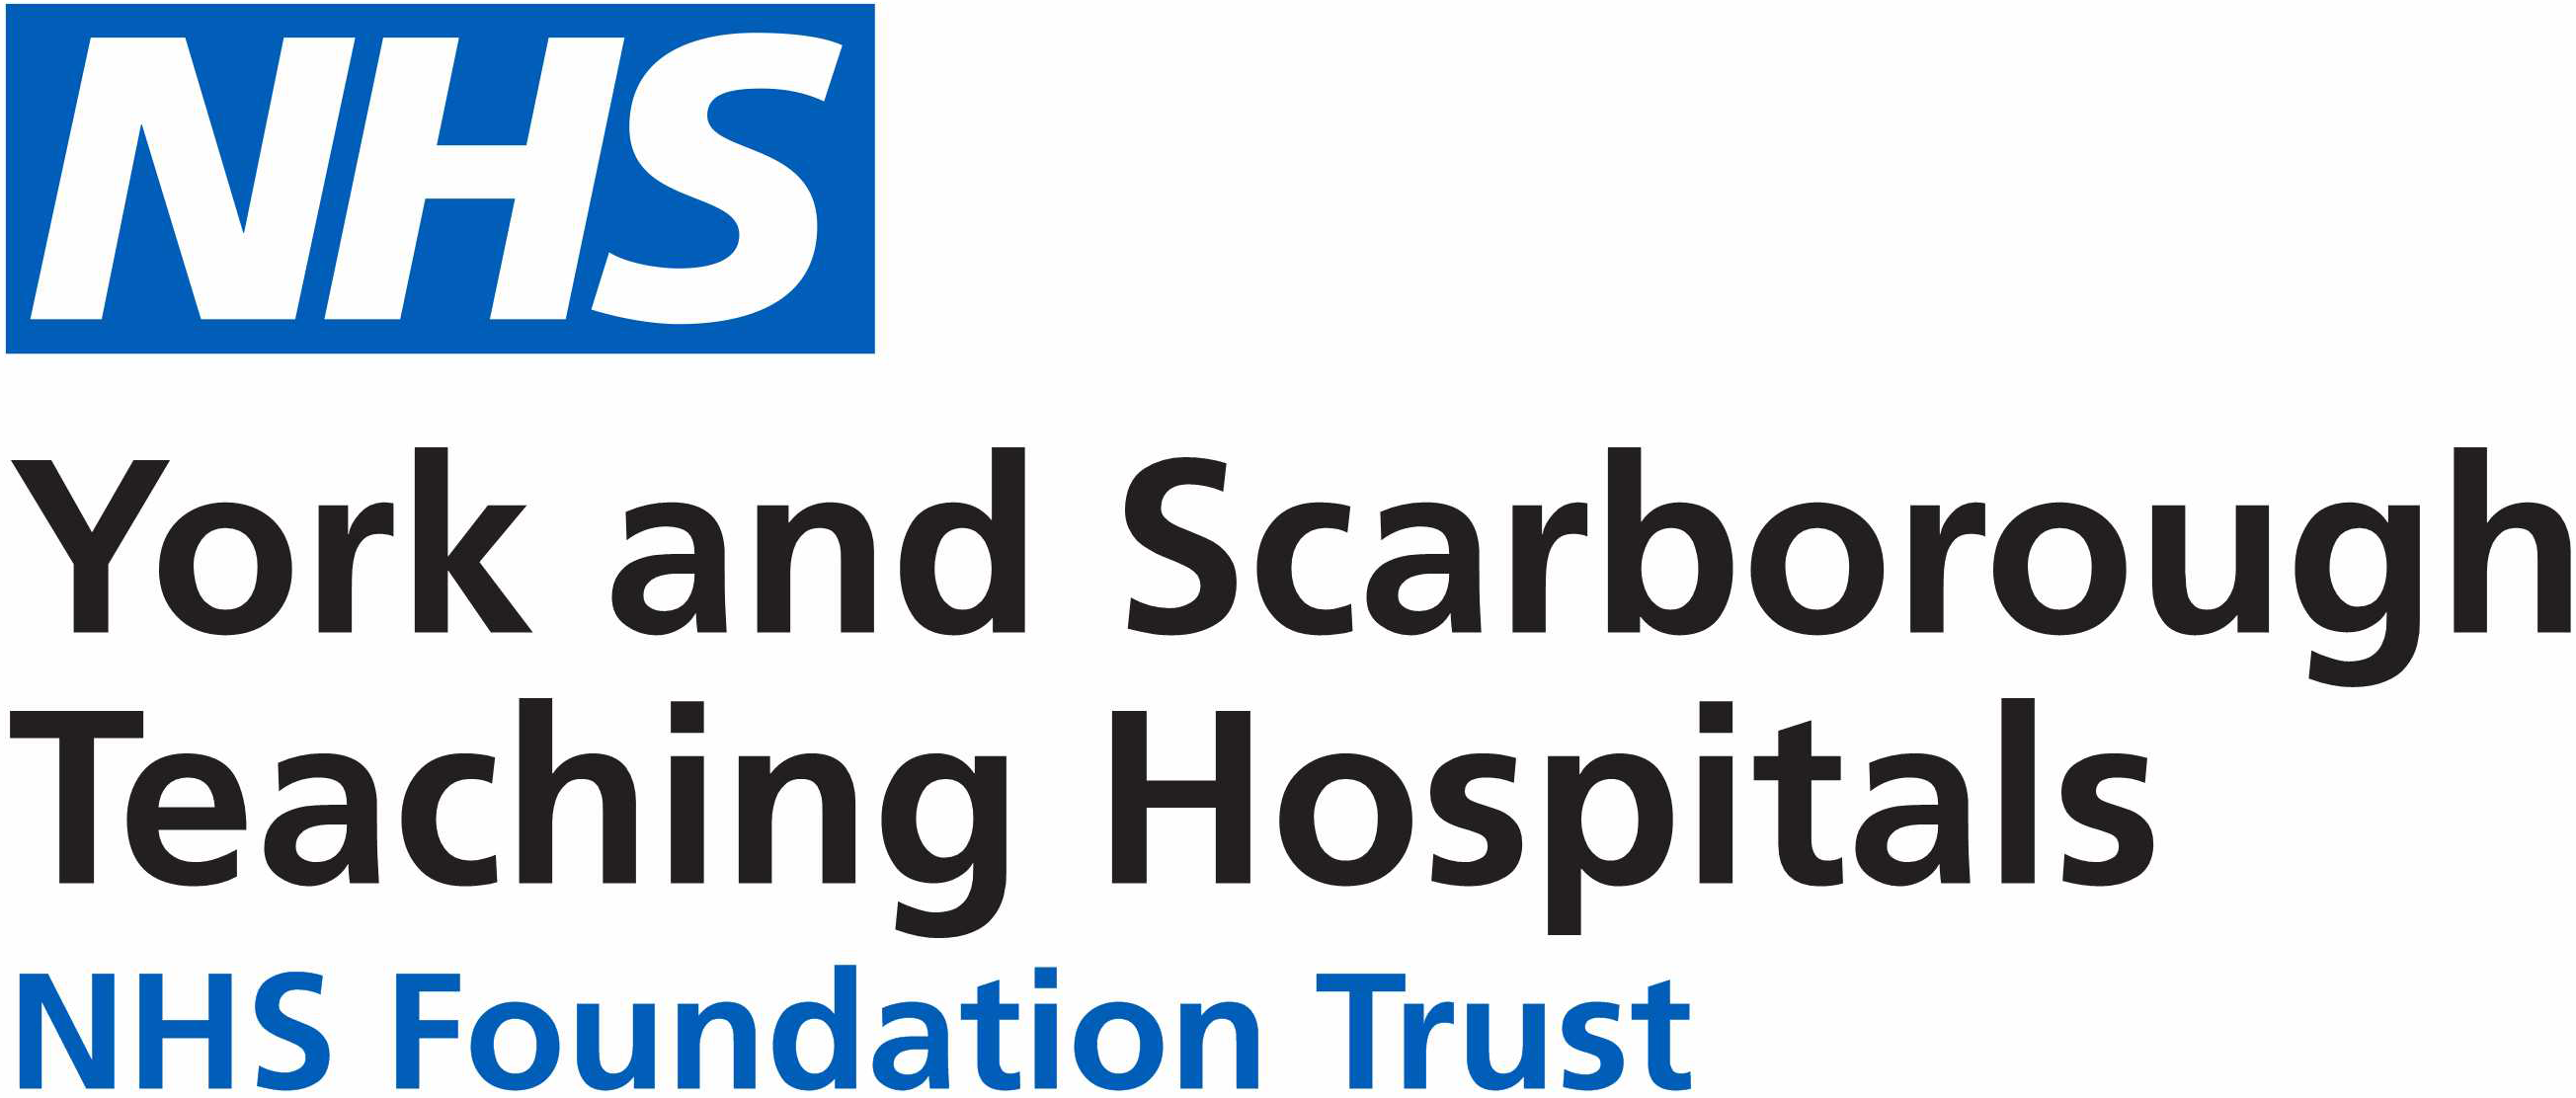 York and Scarborough Teaching Hospitals: NHS Foundation Trust